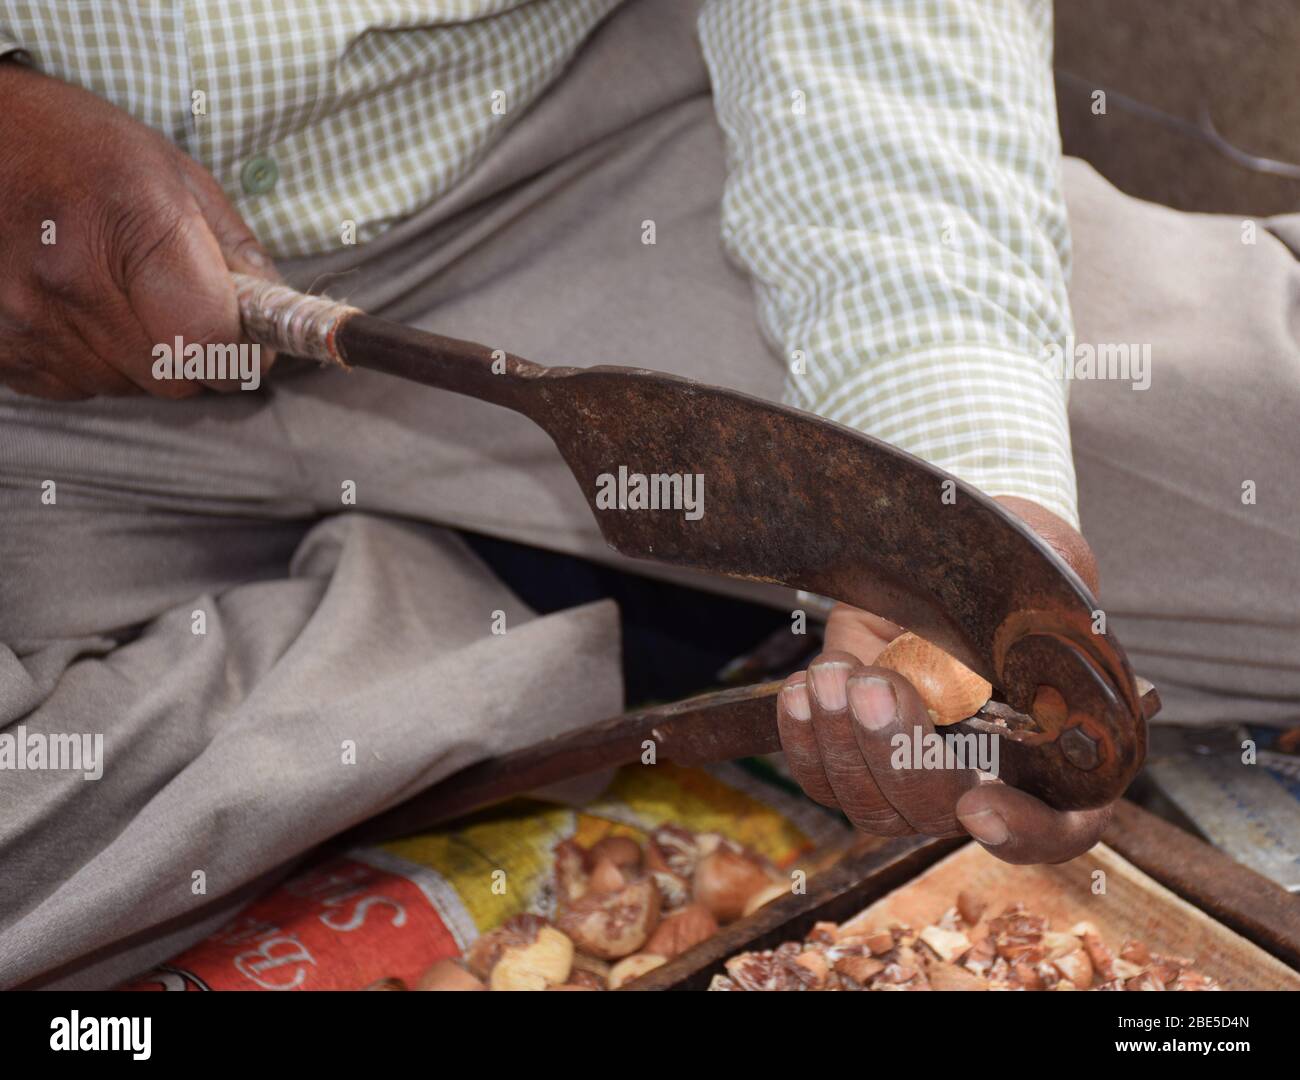 An Indian paan wala or betel nut seller cutting Betel nuts with his nut cracker Stock Photo